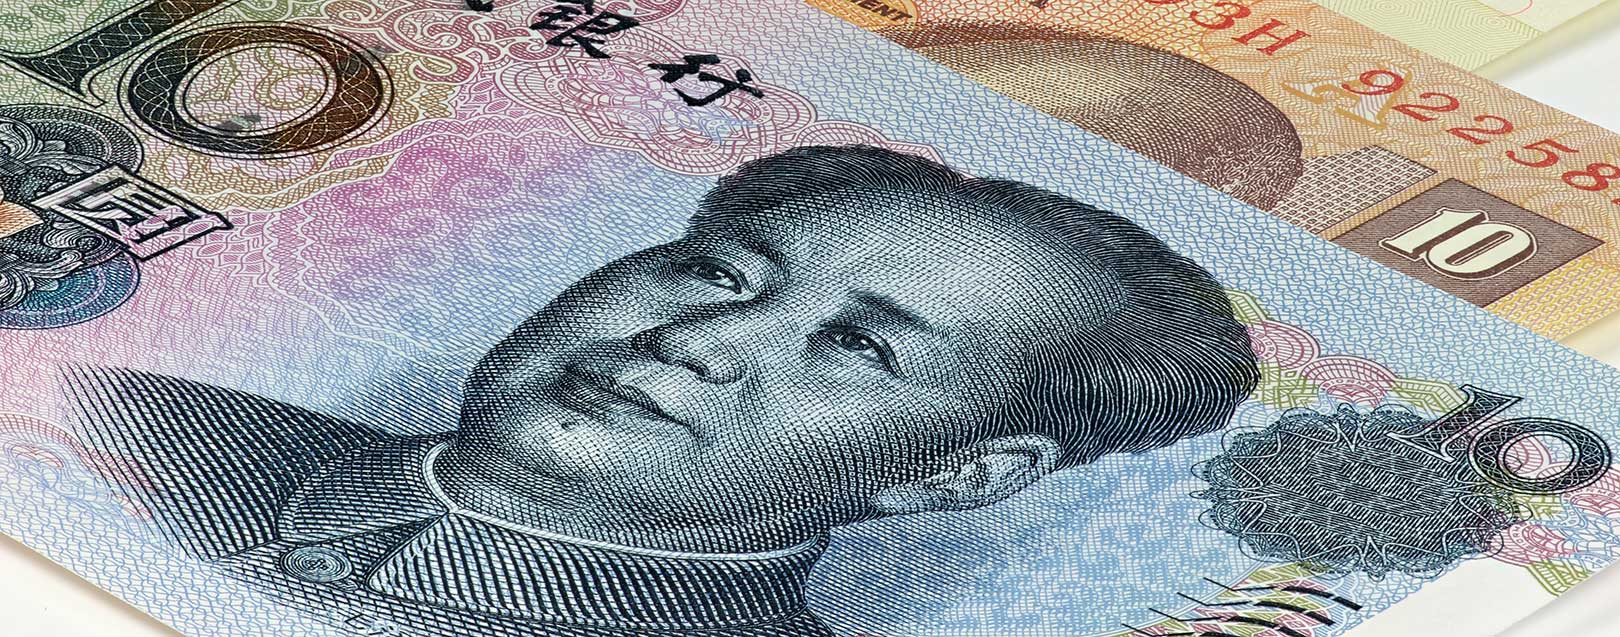 NDB to issue 3 bn yuan worth green bonds in China